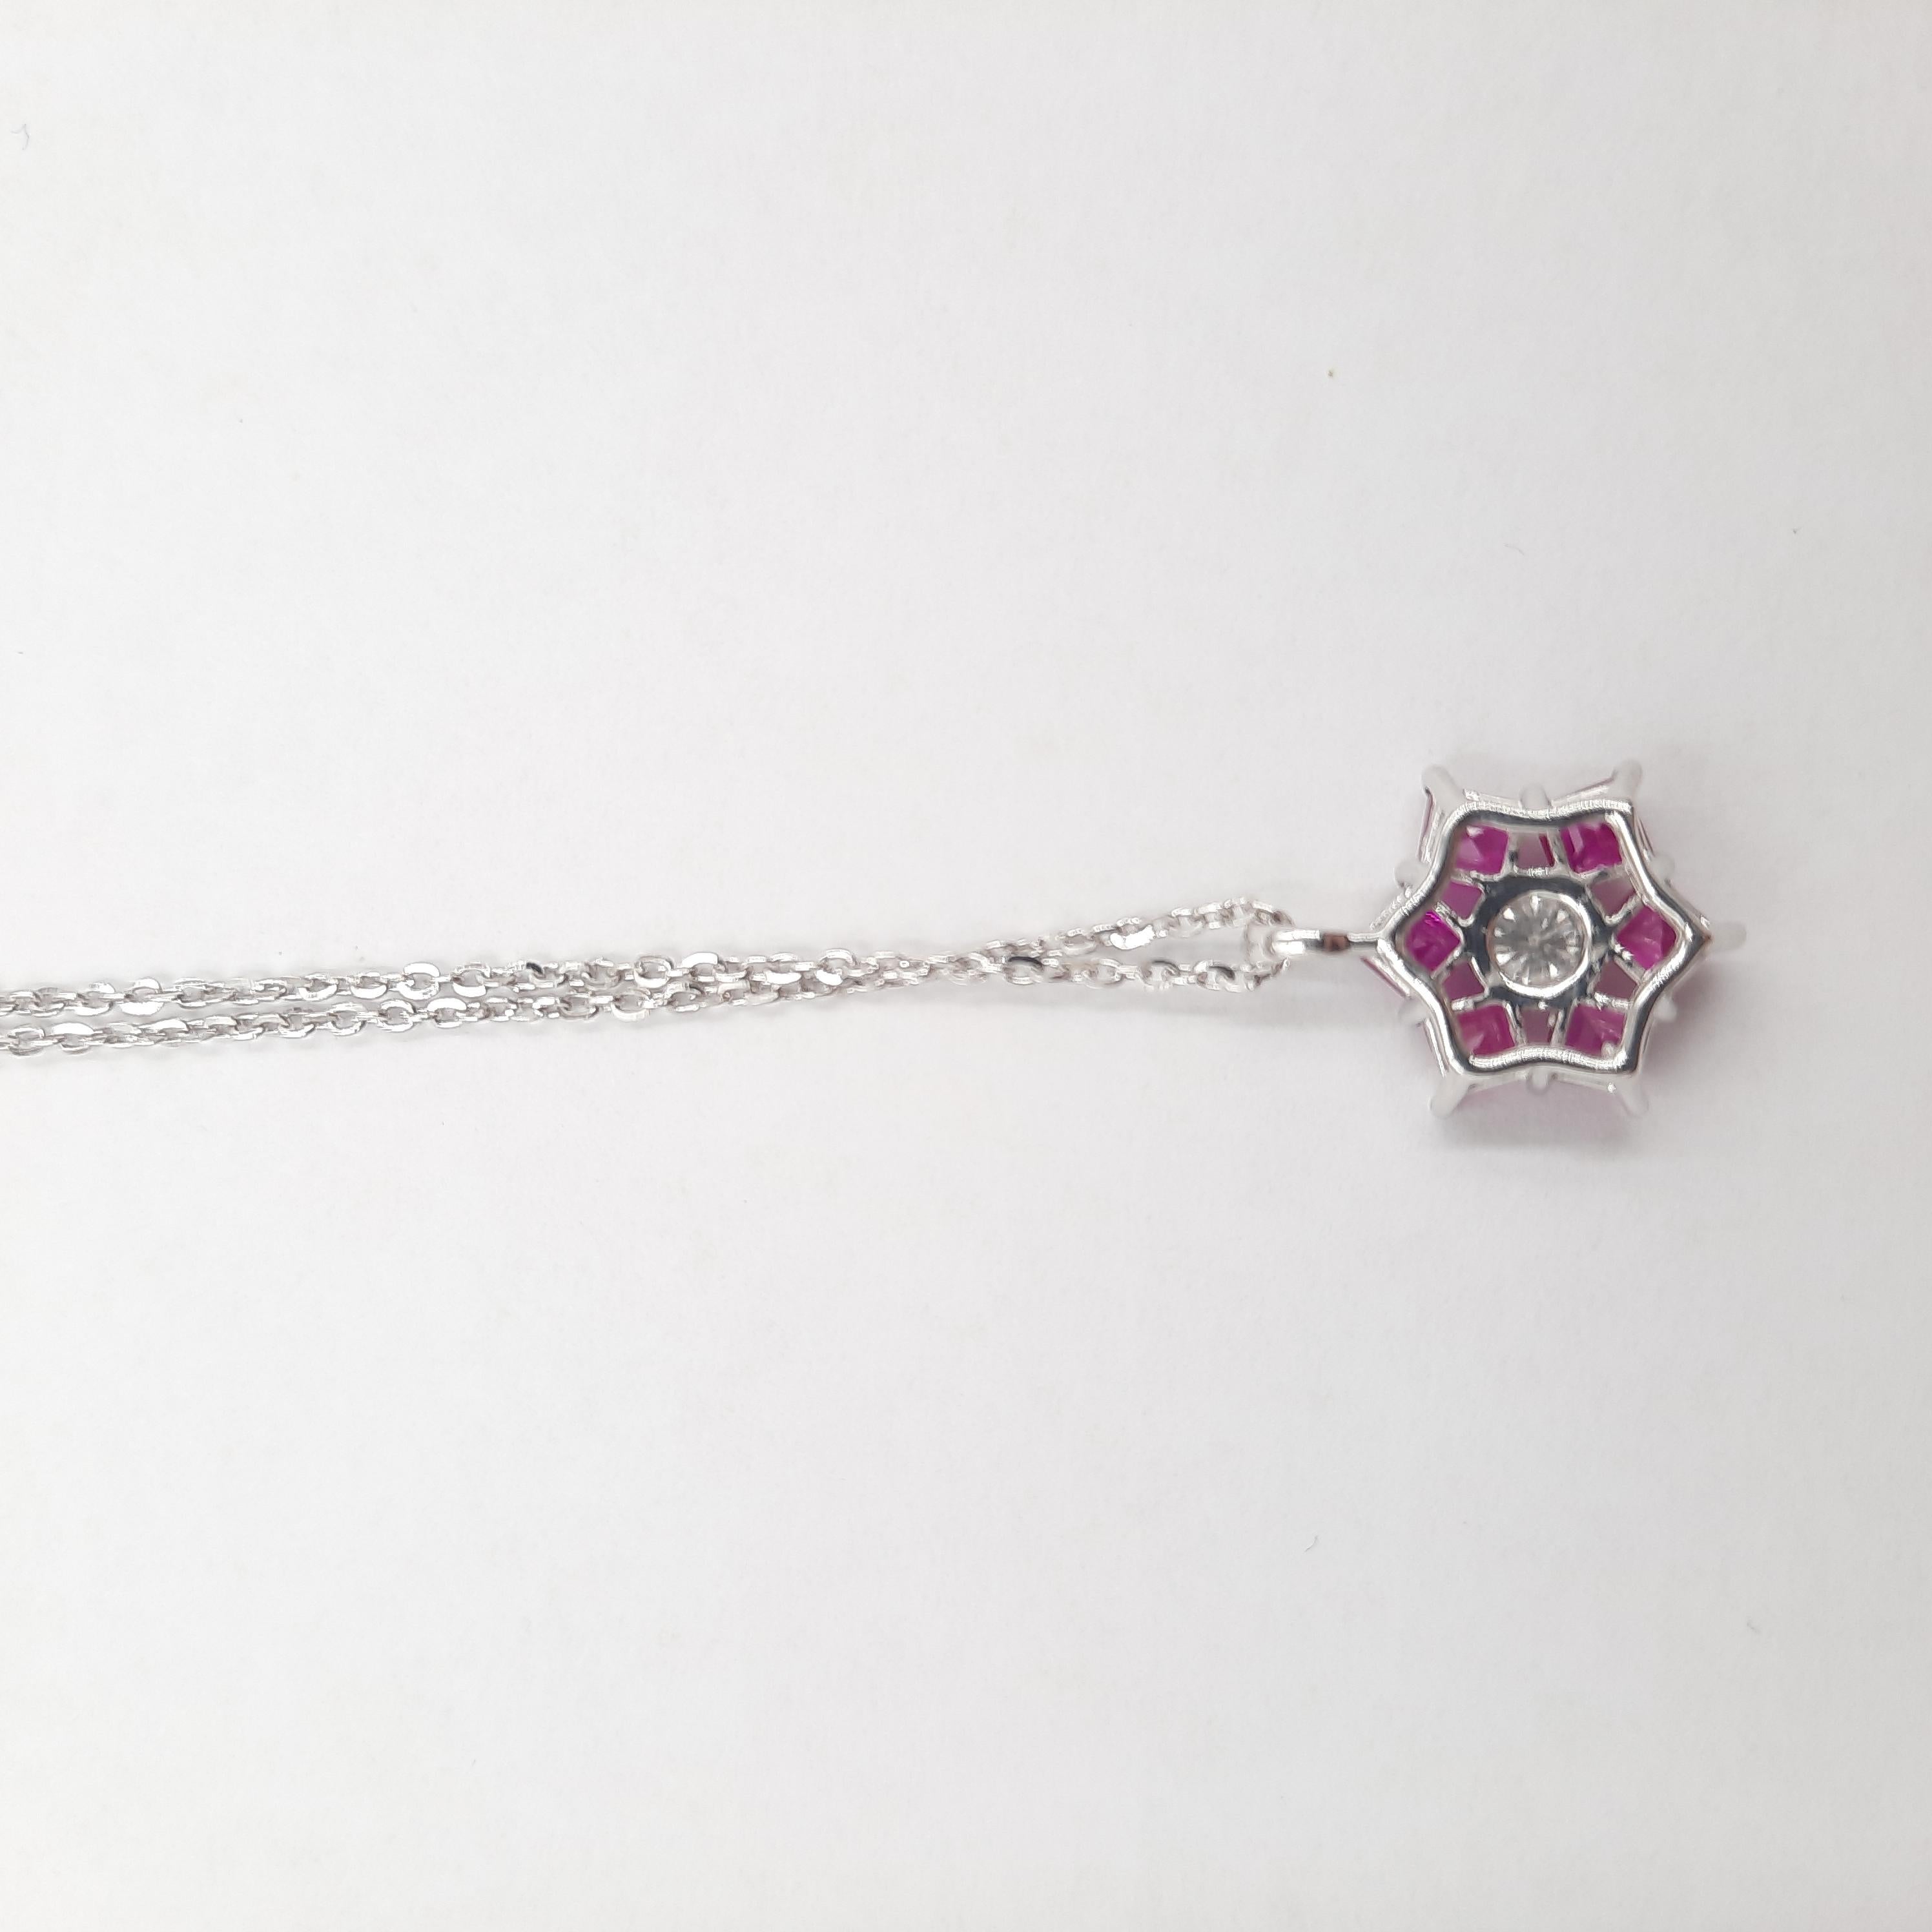 Italian Brilliant Cut Diamond Ruby 18 Carats White Gold Pendant Chain In New Condition For Sale In Marcianise, CE, IT